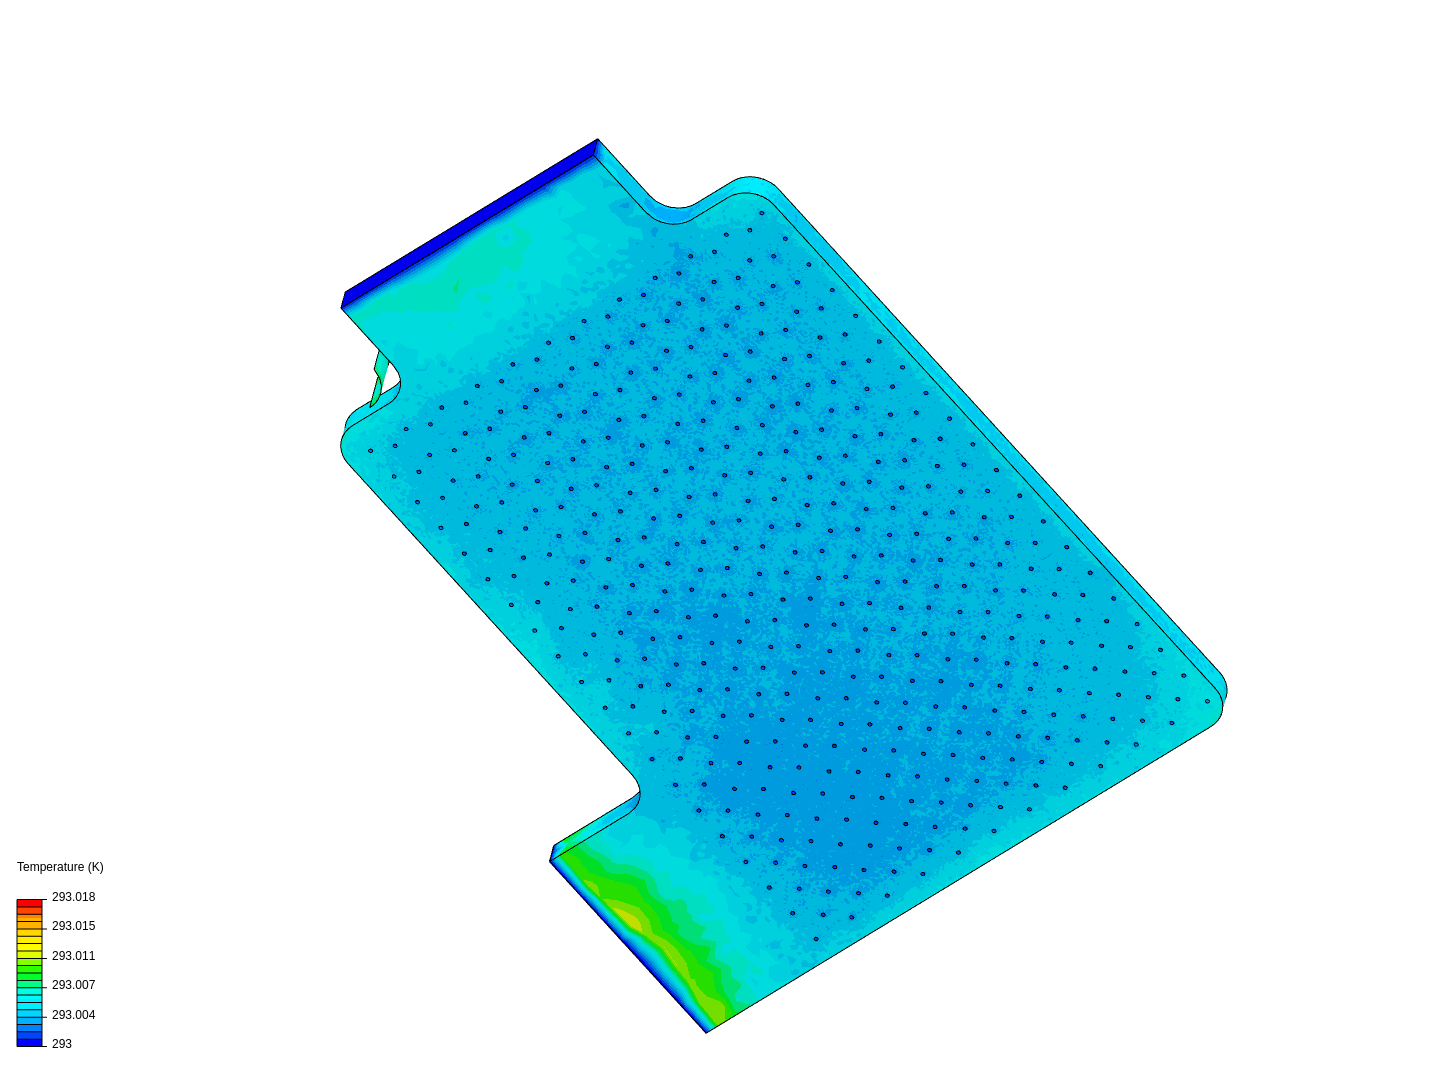 Cooling plate image